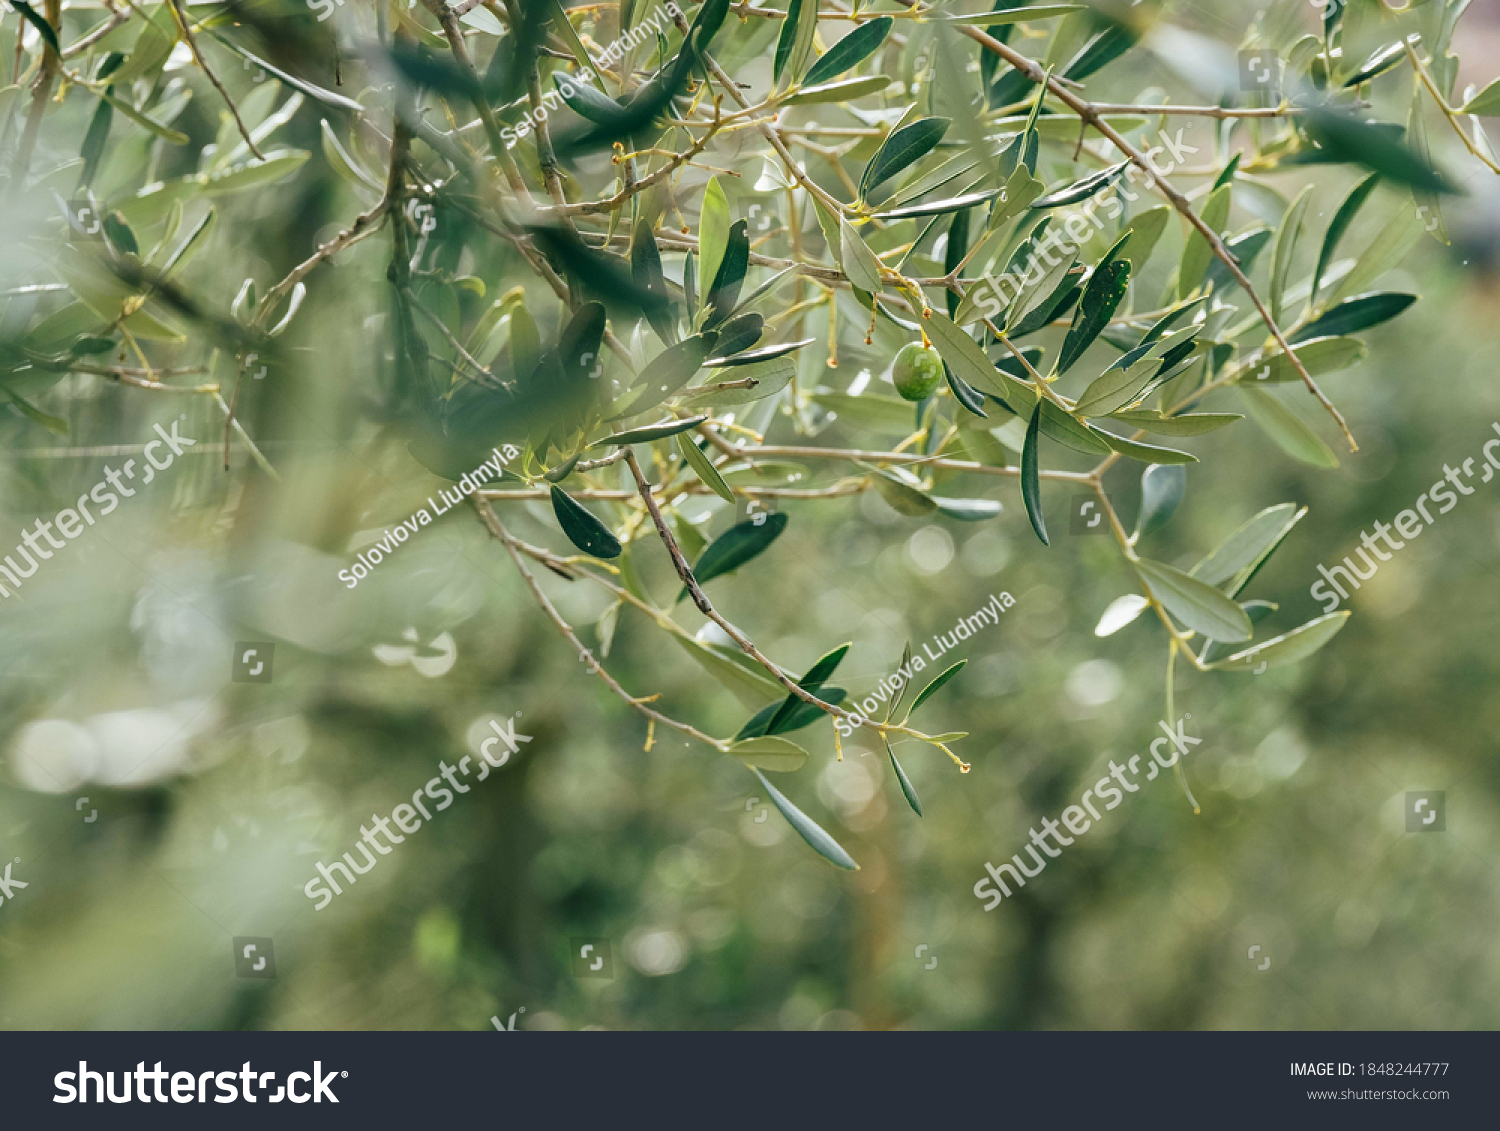 Alone green olive on the olive tree branch with unfocused blurred background with green foliage and bright morning dew drops on the leaves. Eco food and a Mediterranean agriculture concept image #1848244777